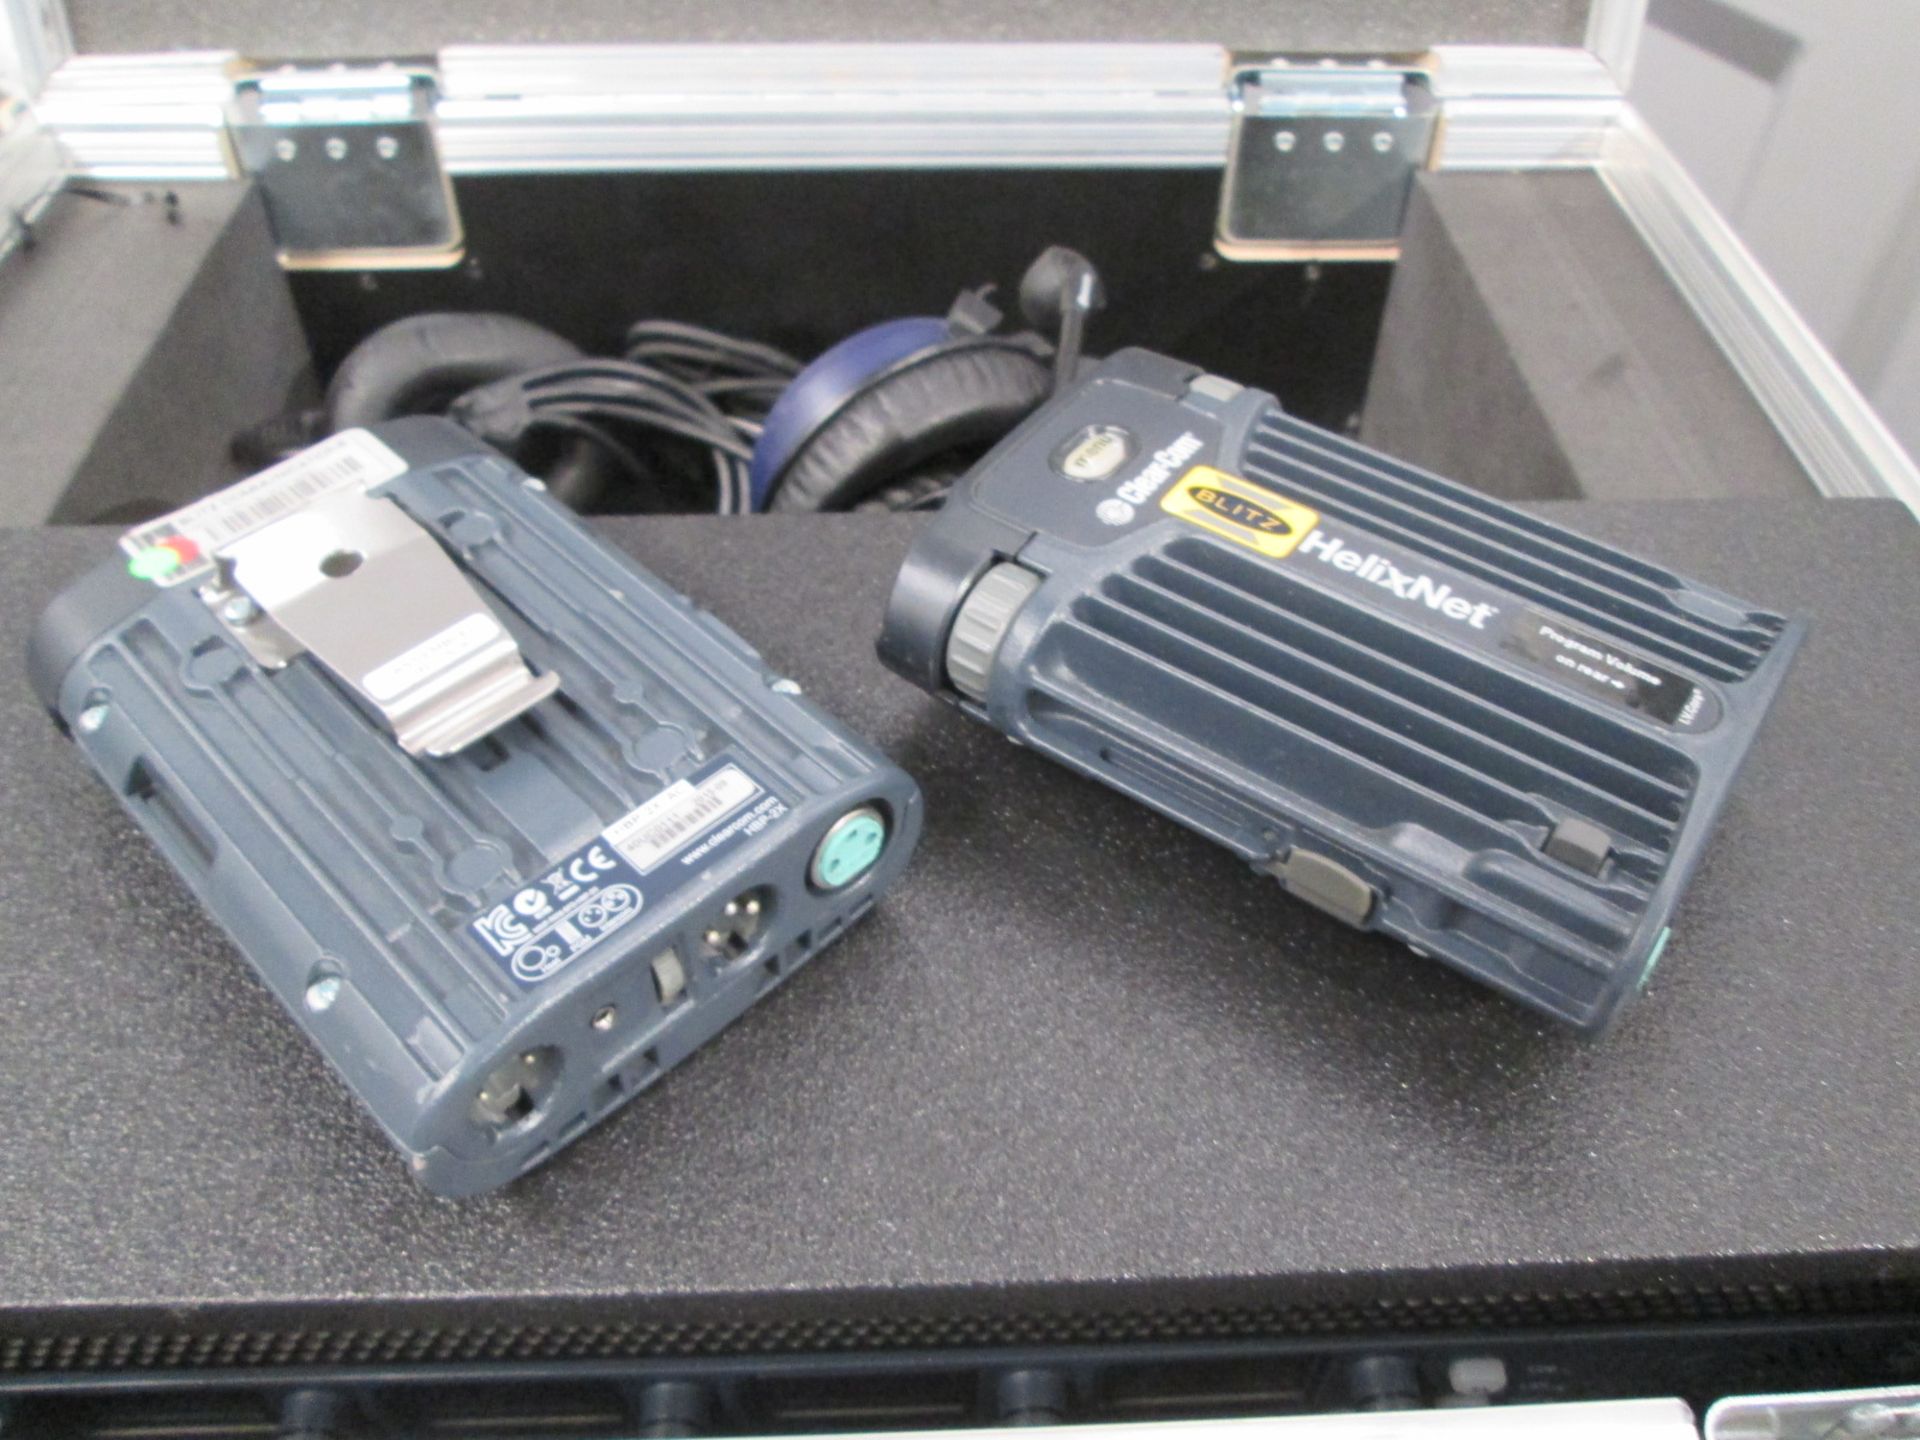 Clear-Com HelixNet Radio System, To include HRM-4X base station, 2 x HBP-2X belt packs, 2 x - Image 4 of 7